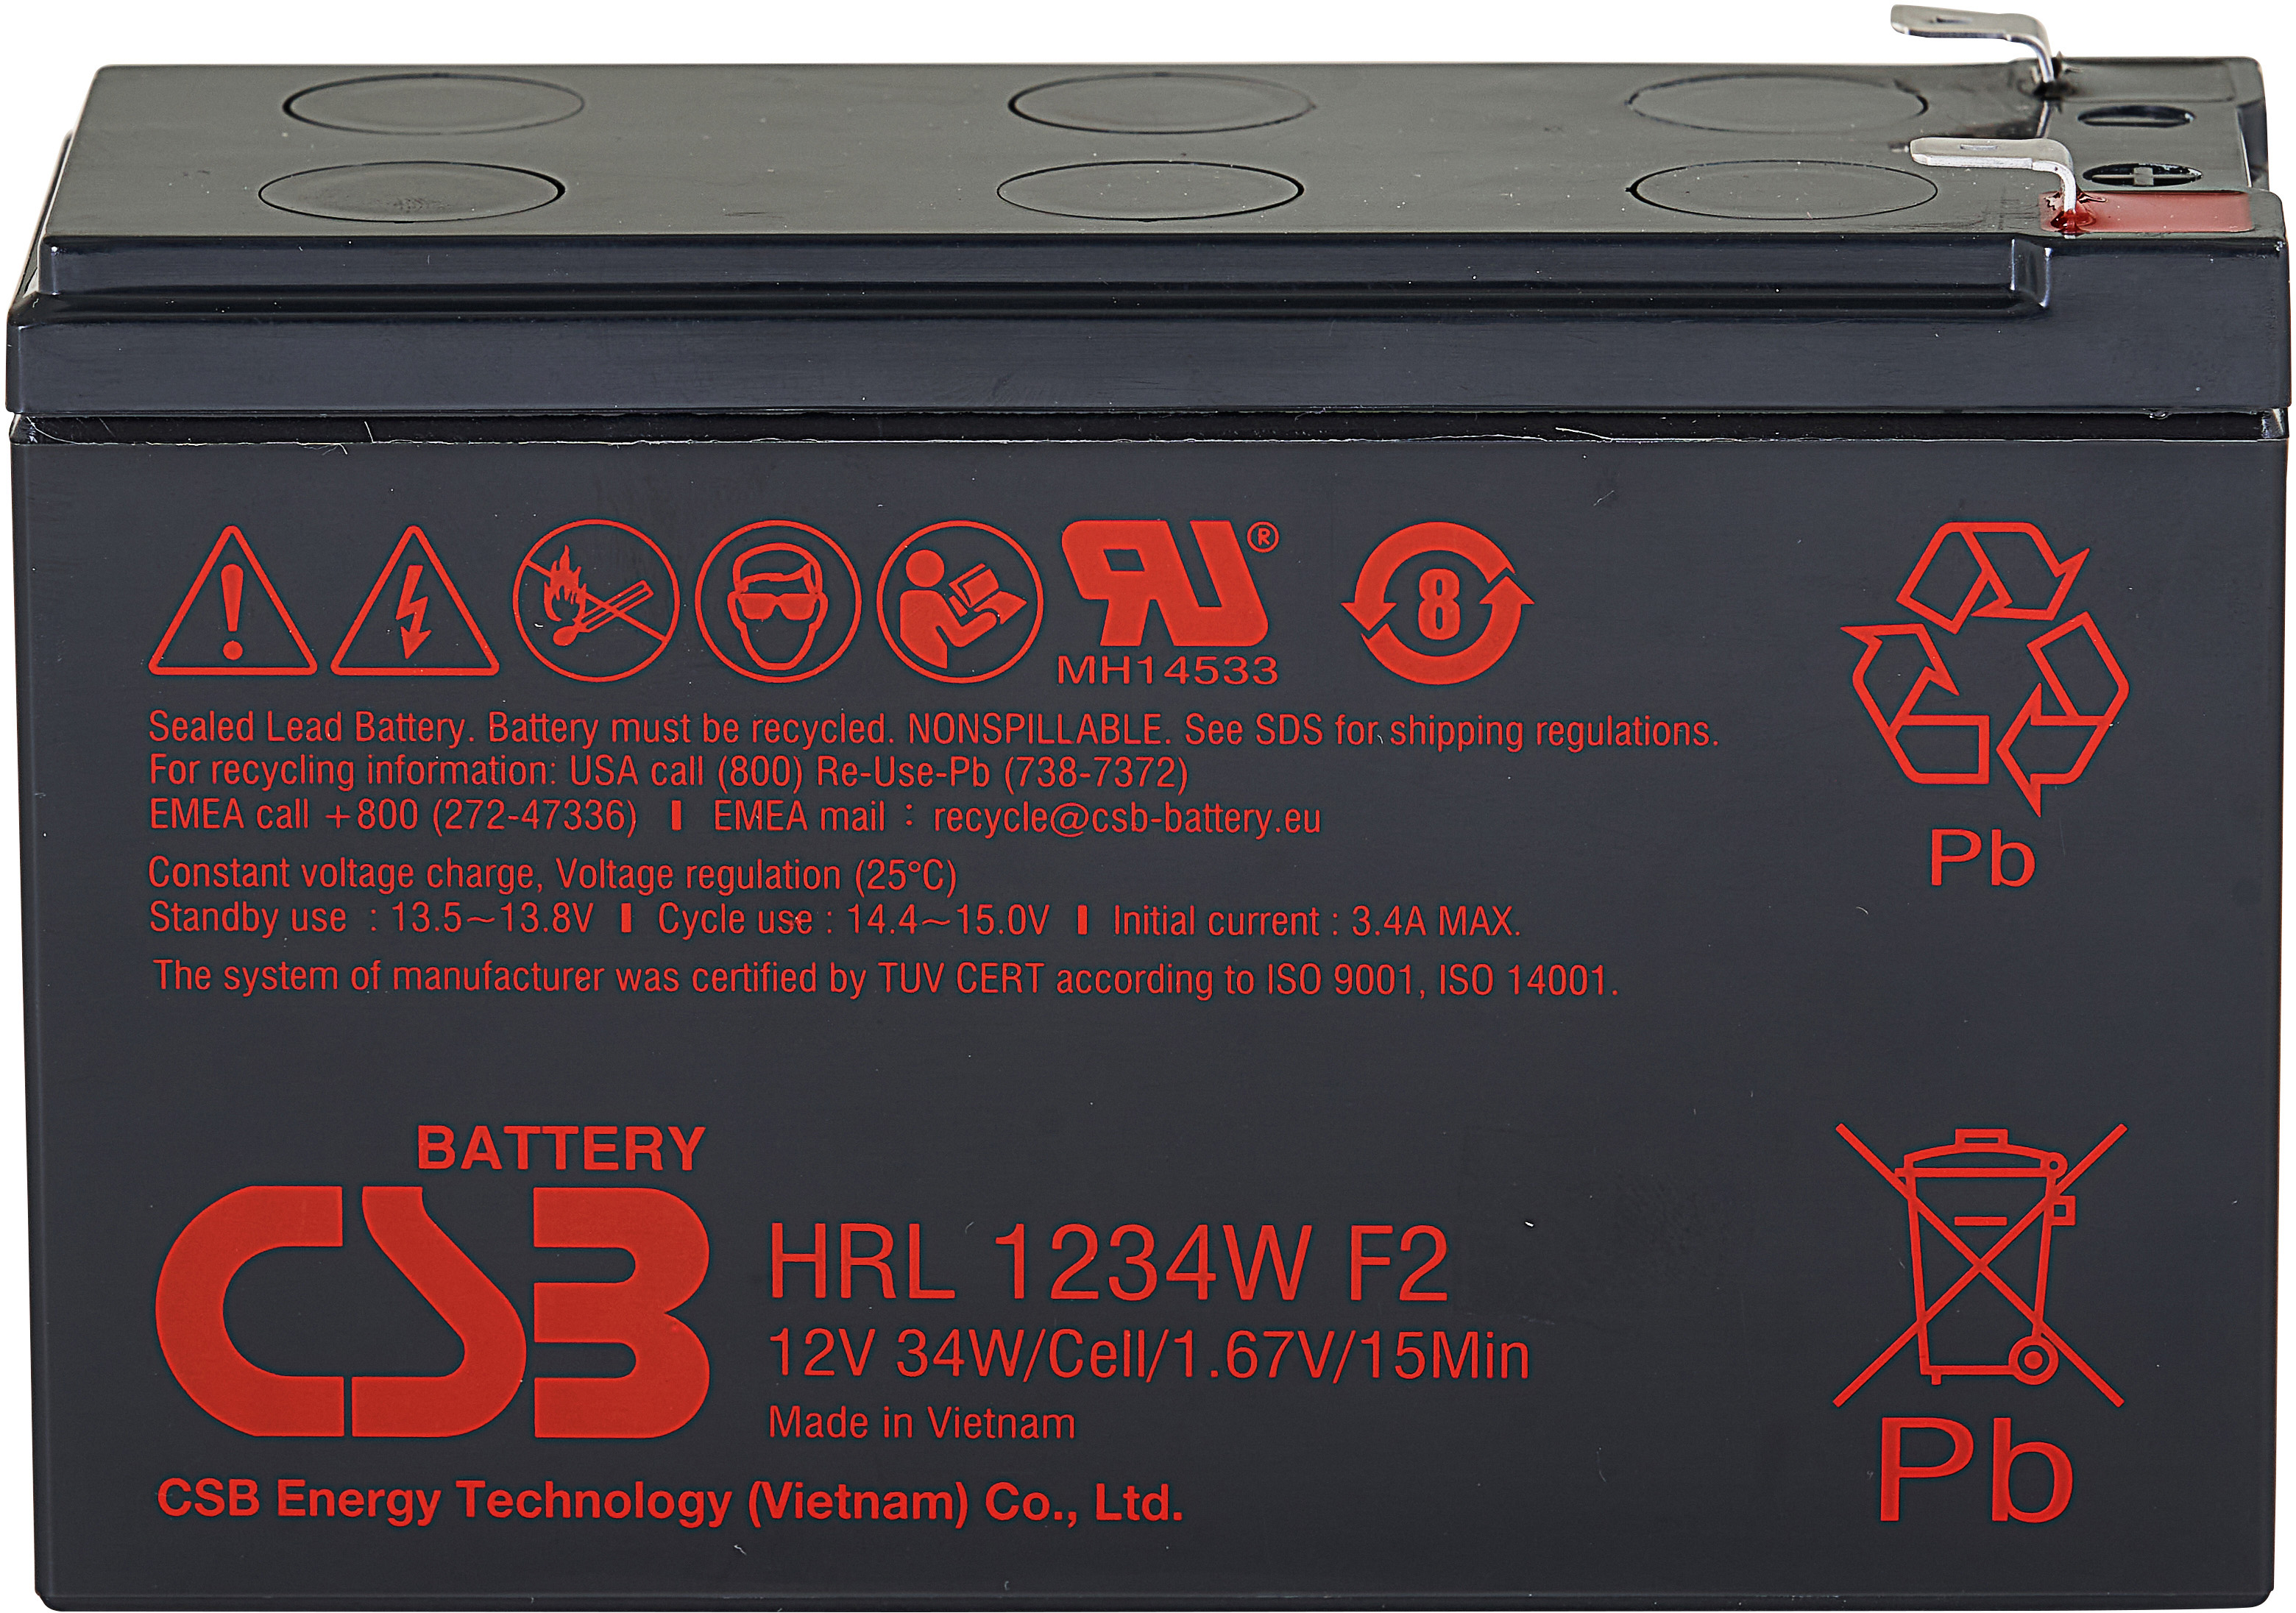 Battery CSB series HRL, HRL1234W F2 FR, voltage 12V, capacity 34 W/C at 15 min. discharge to U con. - 1.67 V/Cel at 25°C, (discharge 20 hours), max. discharge current (5 sec.) 130A, short circuit current 367A, max. charge current 3.4A, lead-acid type AGM, terminals F2, LxWxH 150.9x64.8x98.6mm., weight 2.7kg., service life 5 years, case made of fire-resistant plastic.